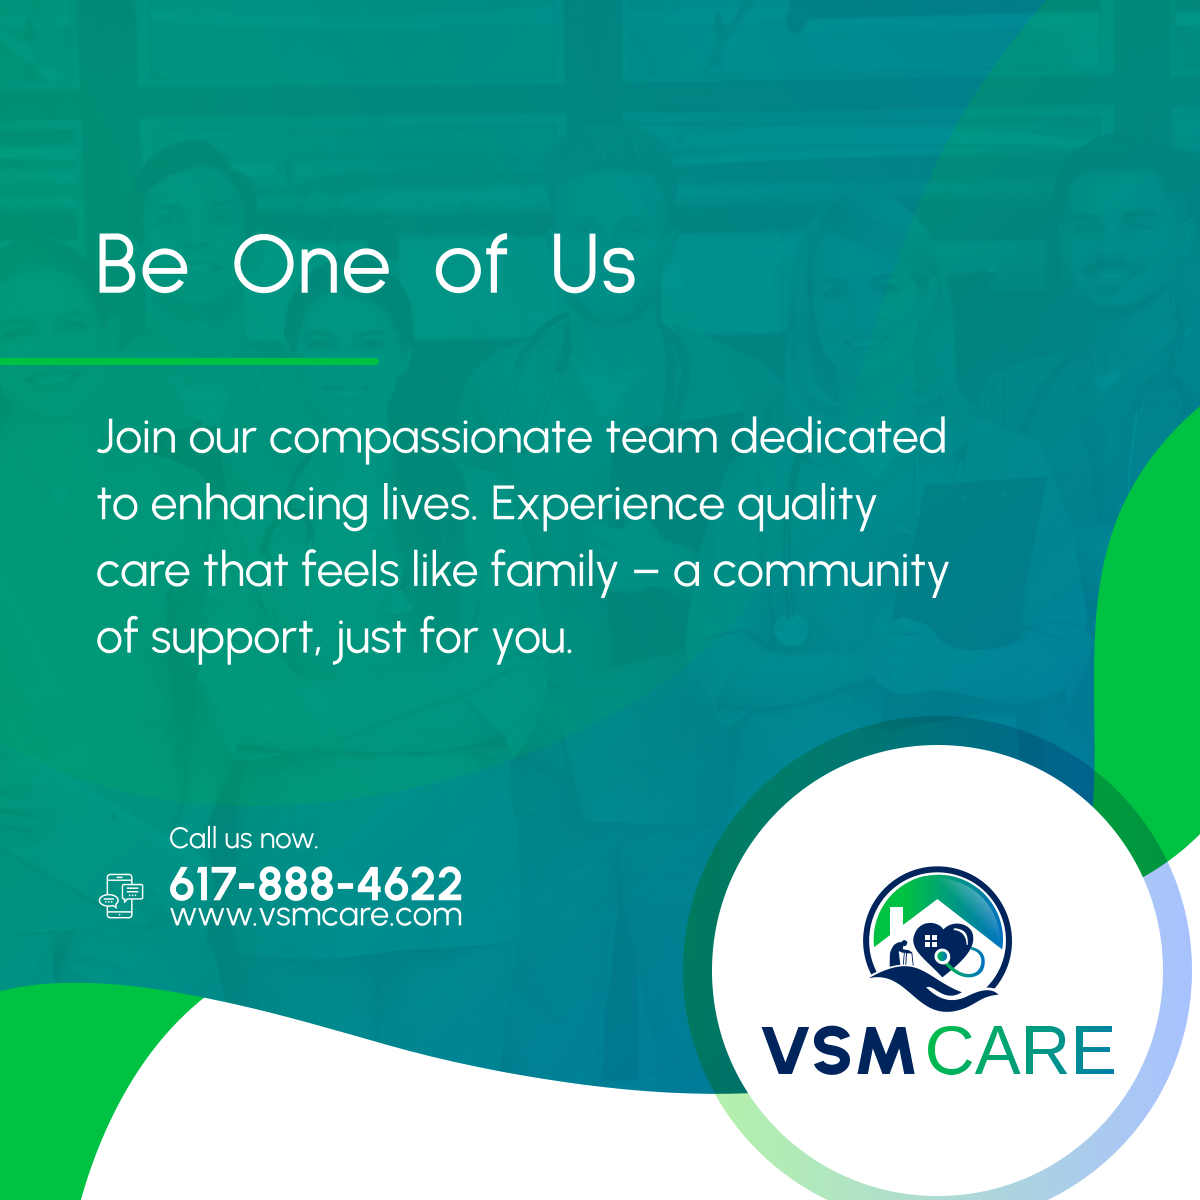 Join our compassionate team! Embrace a fulfilling journey with VSM Care. Your opportunity to make a difference starts here.

#HealthcareStaff #VSMCare #WalthamMA #HomeHealthCare